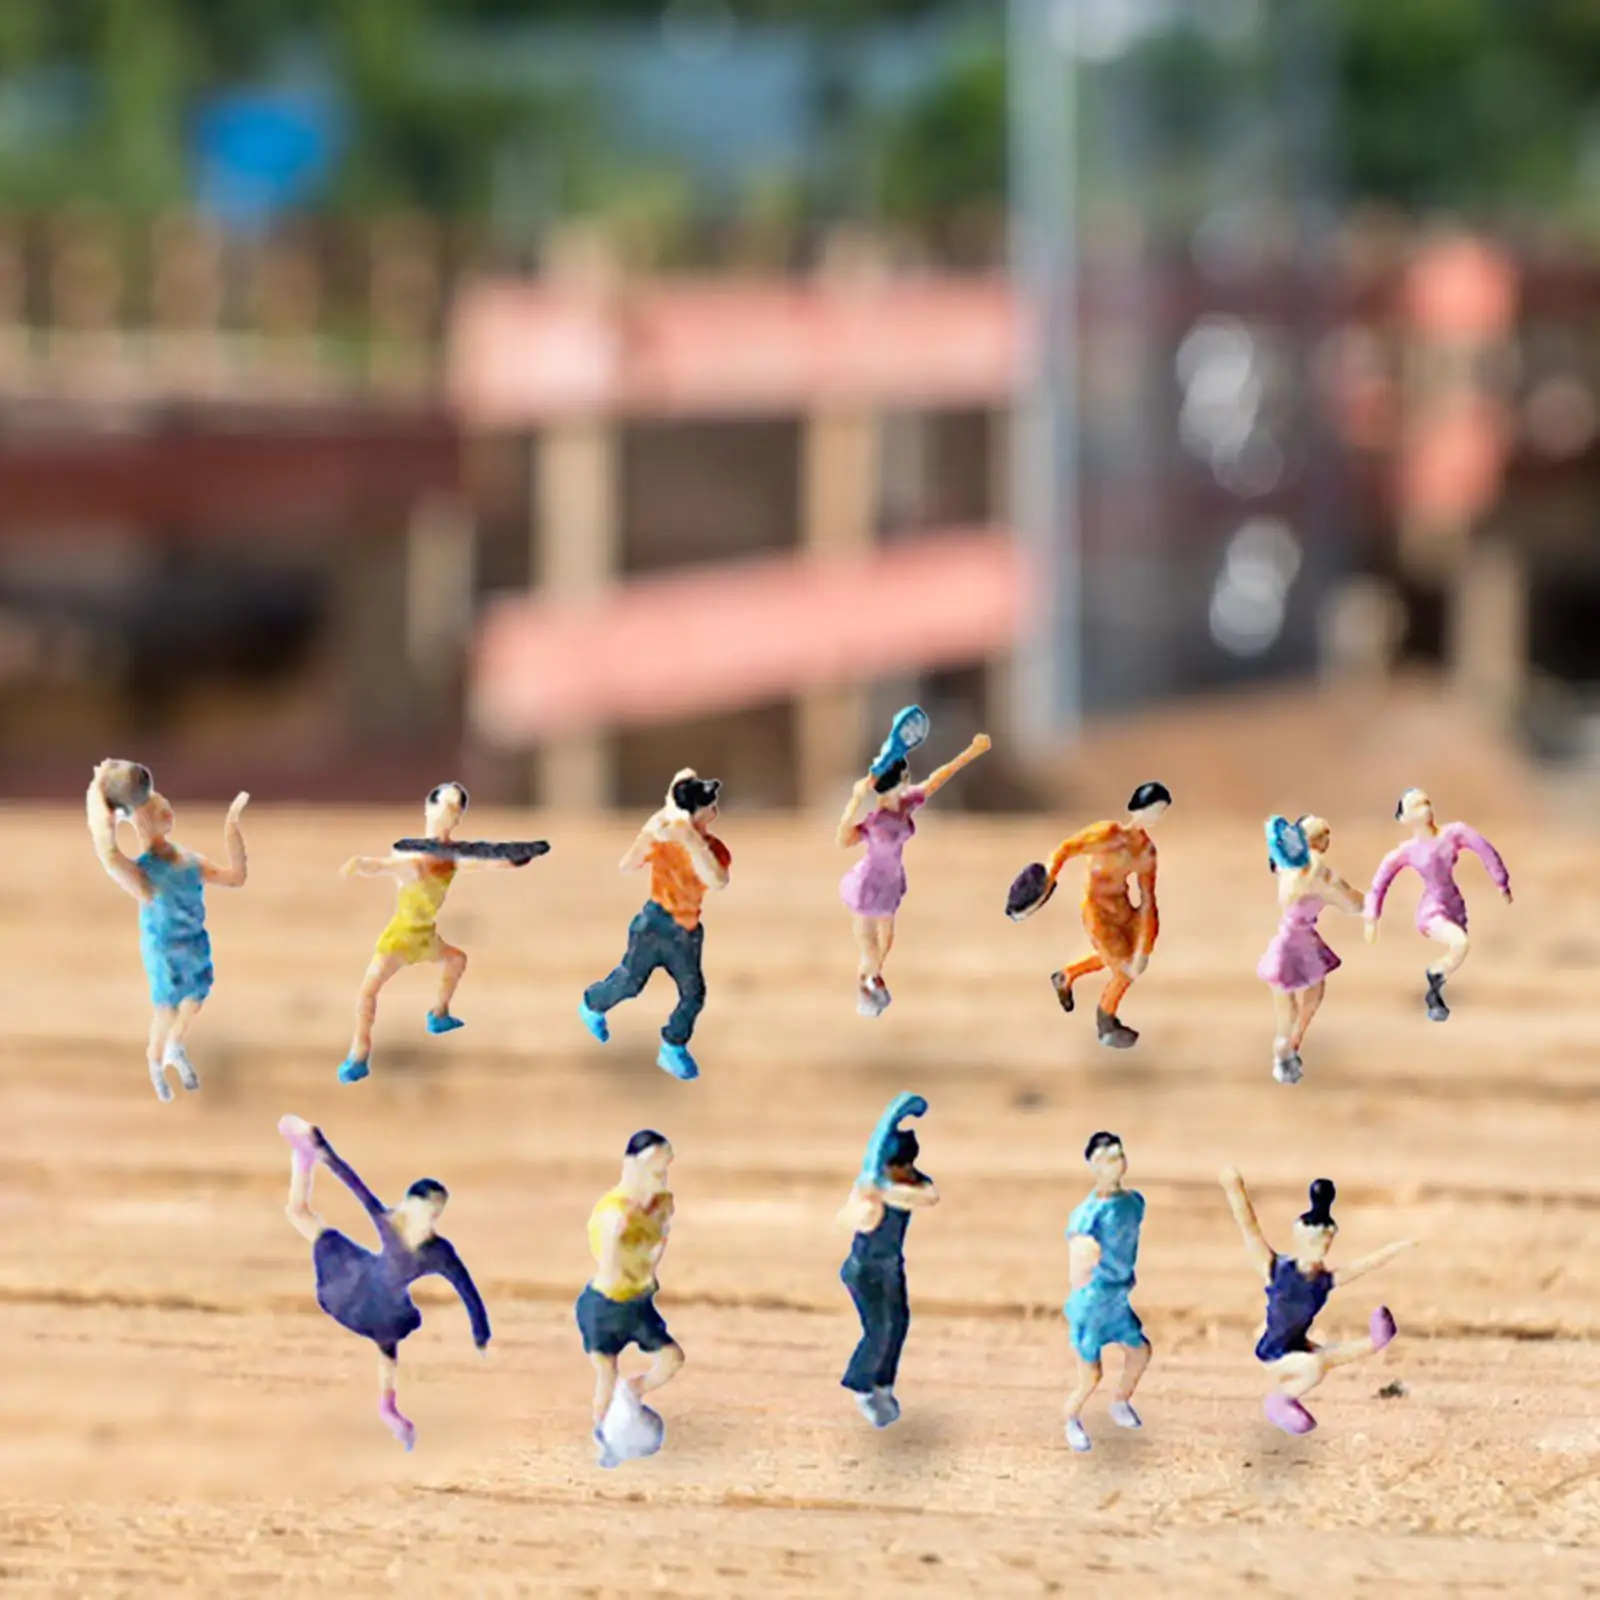 Miniature Model Figures Mini People Model Photography Props Mini Figurines Player Figure for Sand Table Layout Decoration